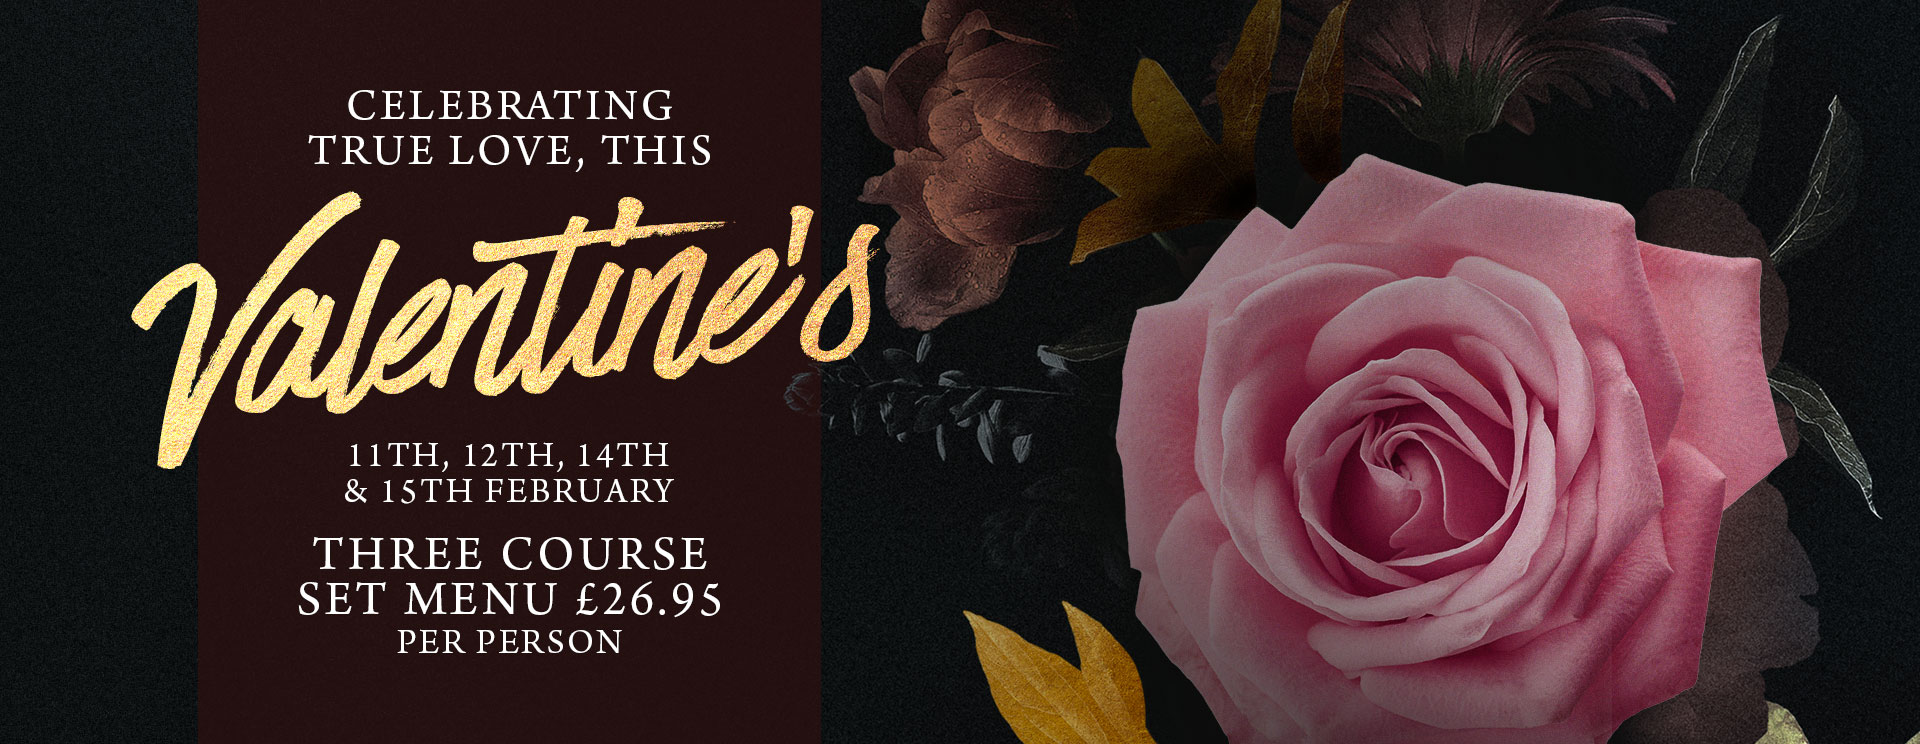 Valentines at The Rose & Crown